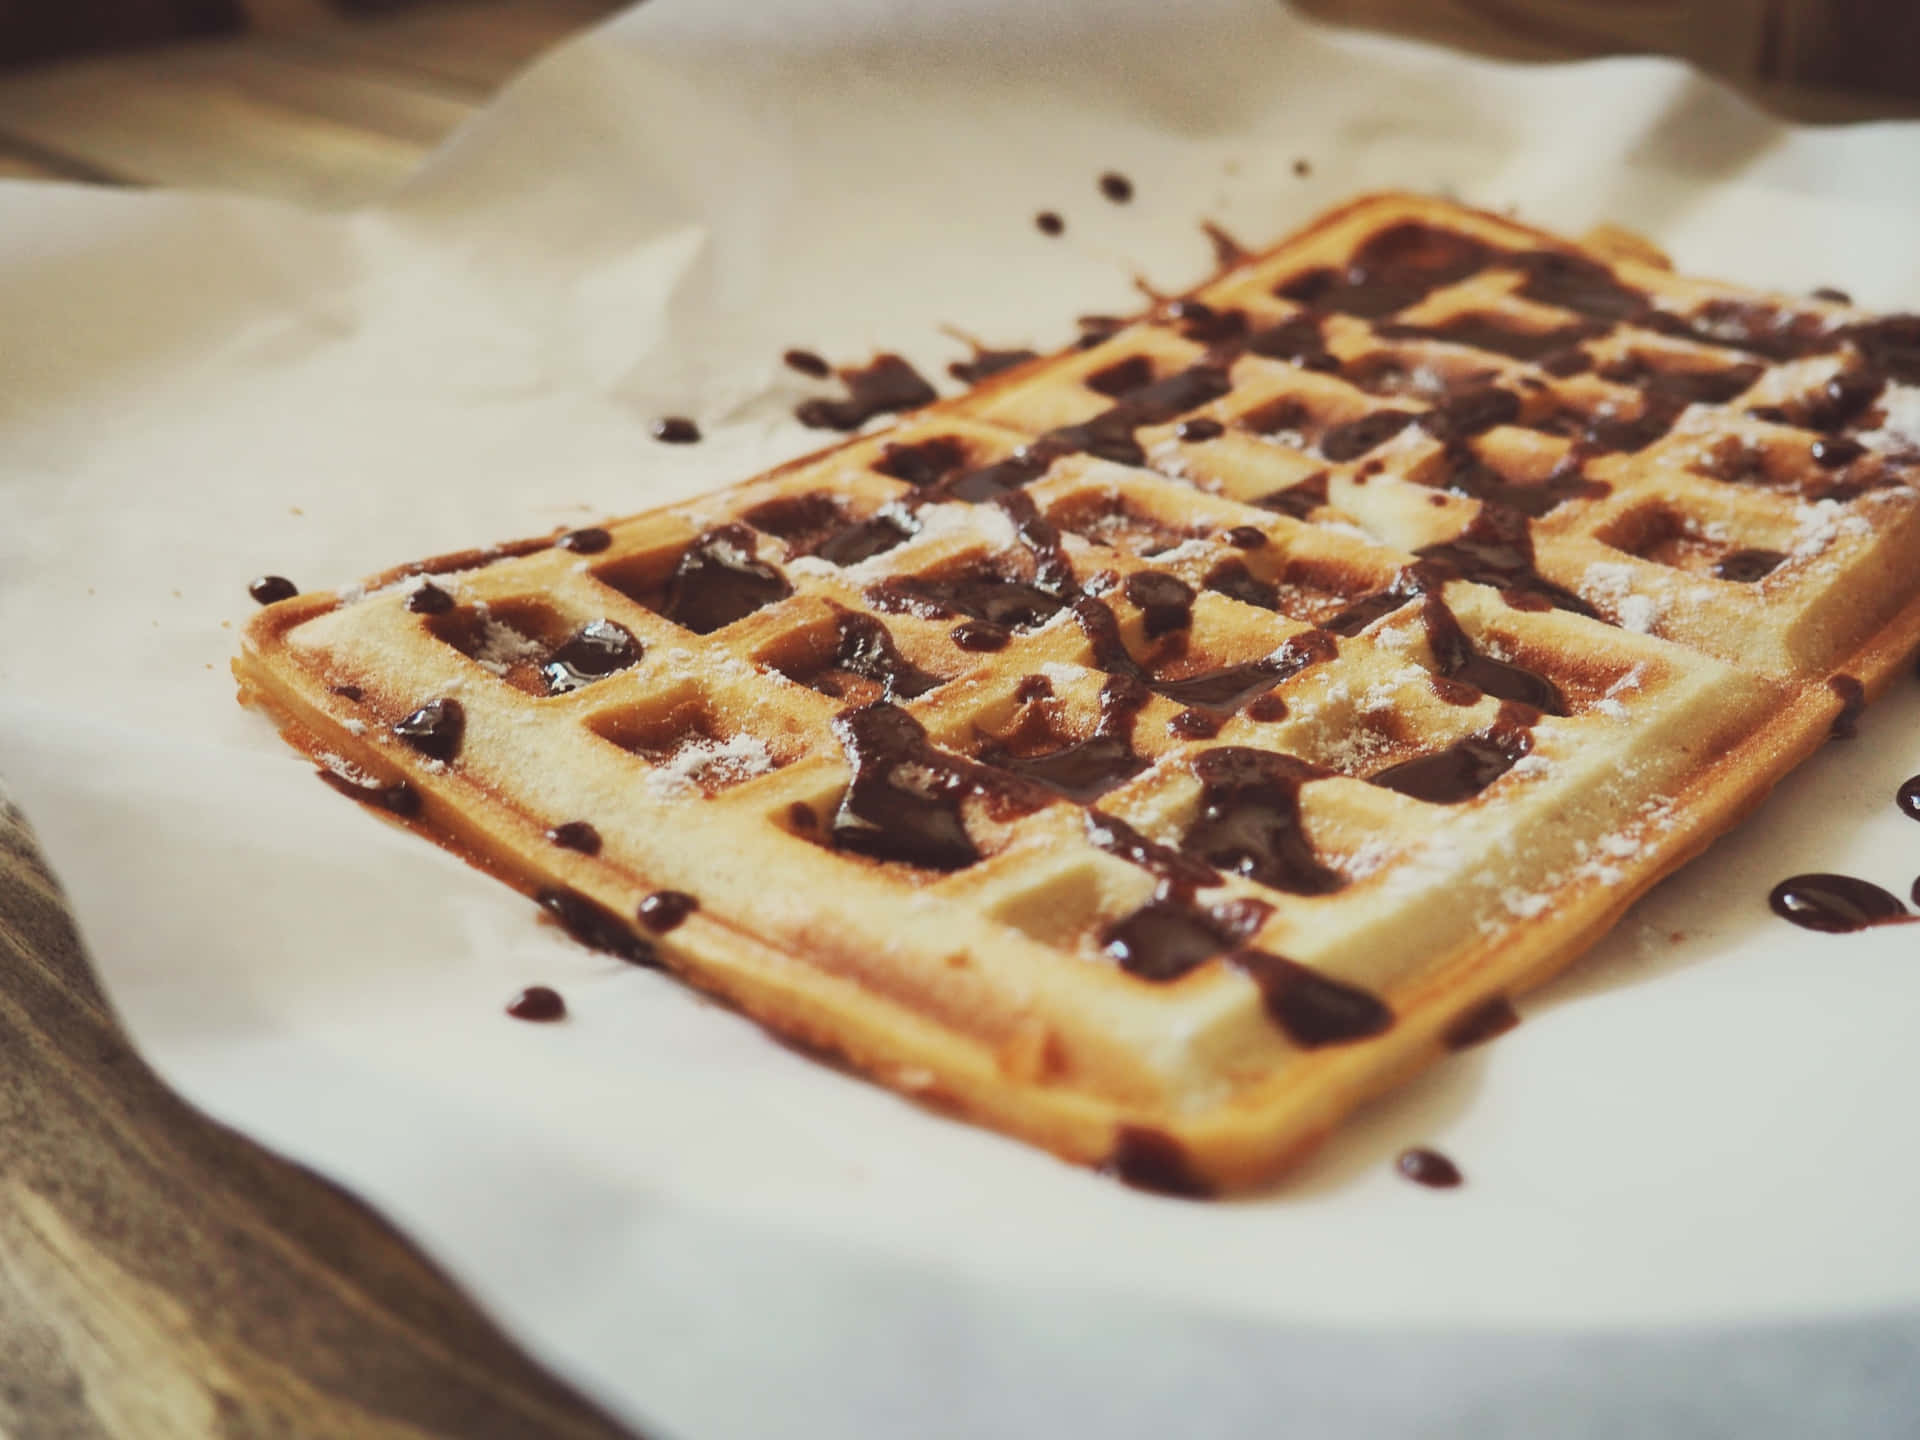 A sweet and delicious homemade waffle